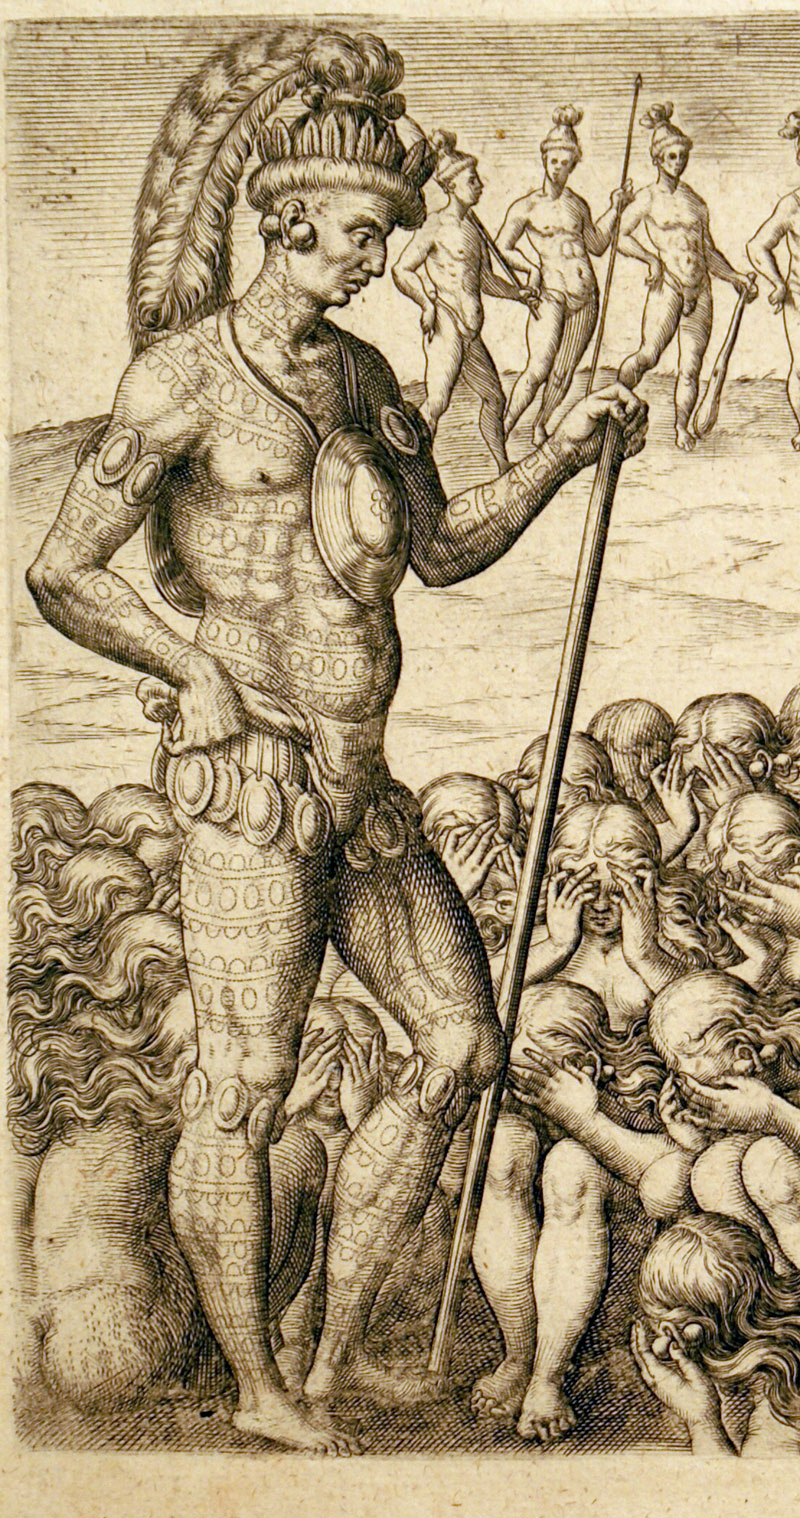 View of New World Indians c. 1591, Widows of Warriors with Chief